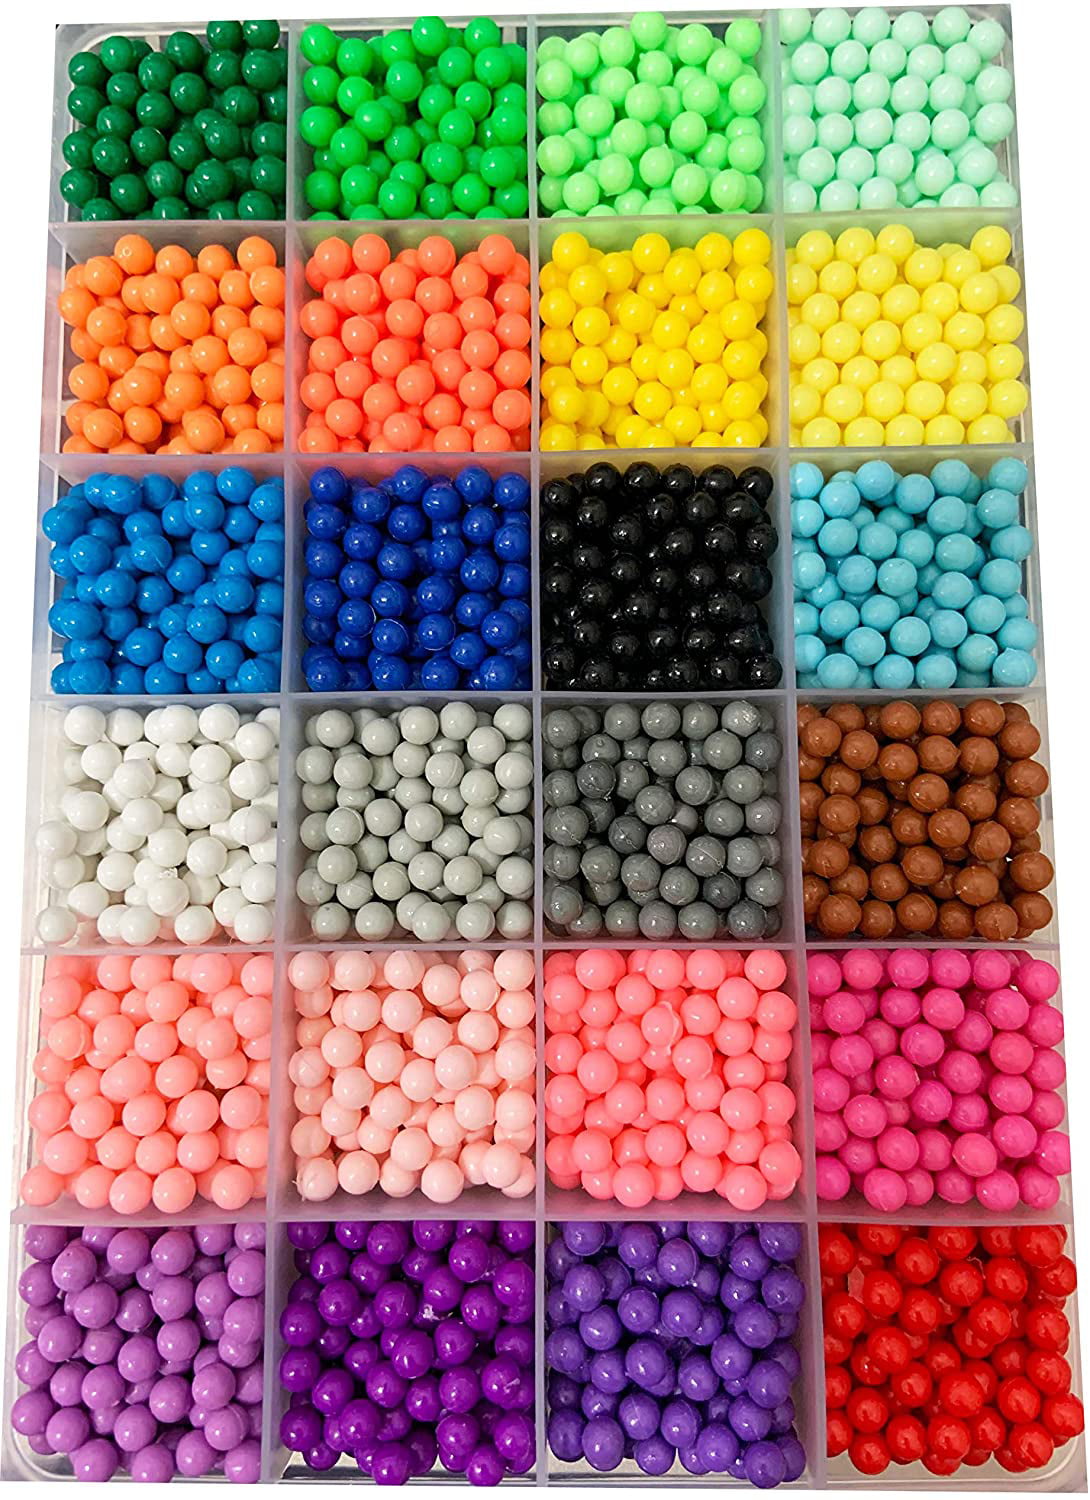 3000 Water Fuse Beads Set 24 Colors DIY Art Craft Spray Toys Kits for Kids, Refill Non-Toxic Water Sticky with Pattern Sample Cards